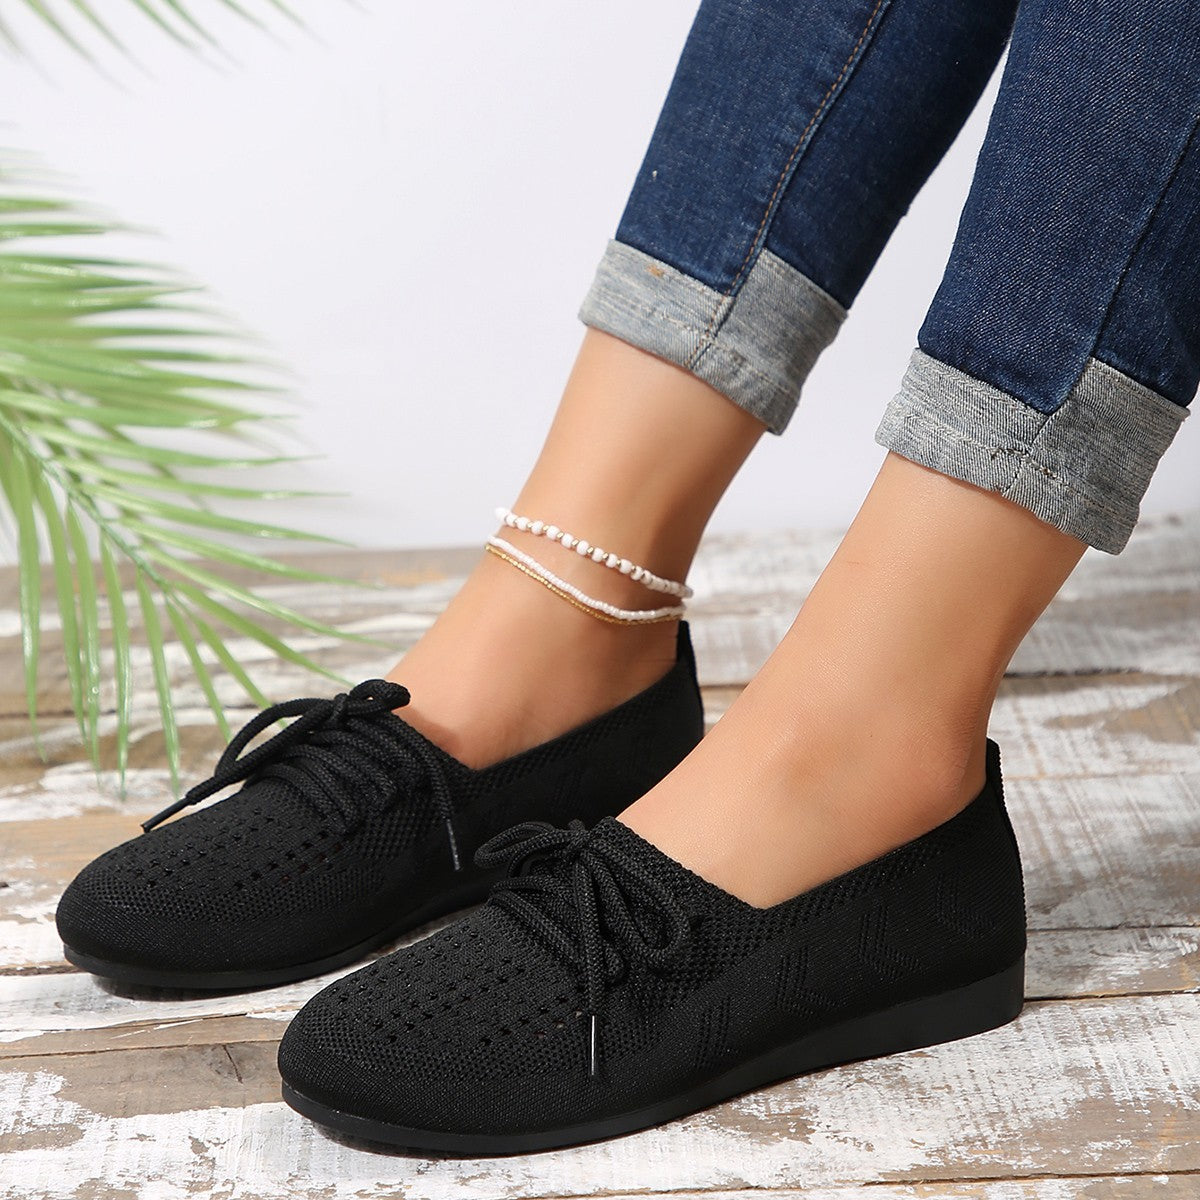 Lace-up Flats Women Fashion Breathable Lazy Mesh Shoes